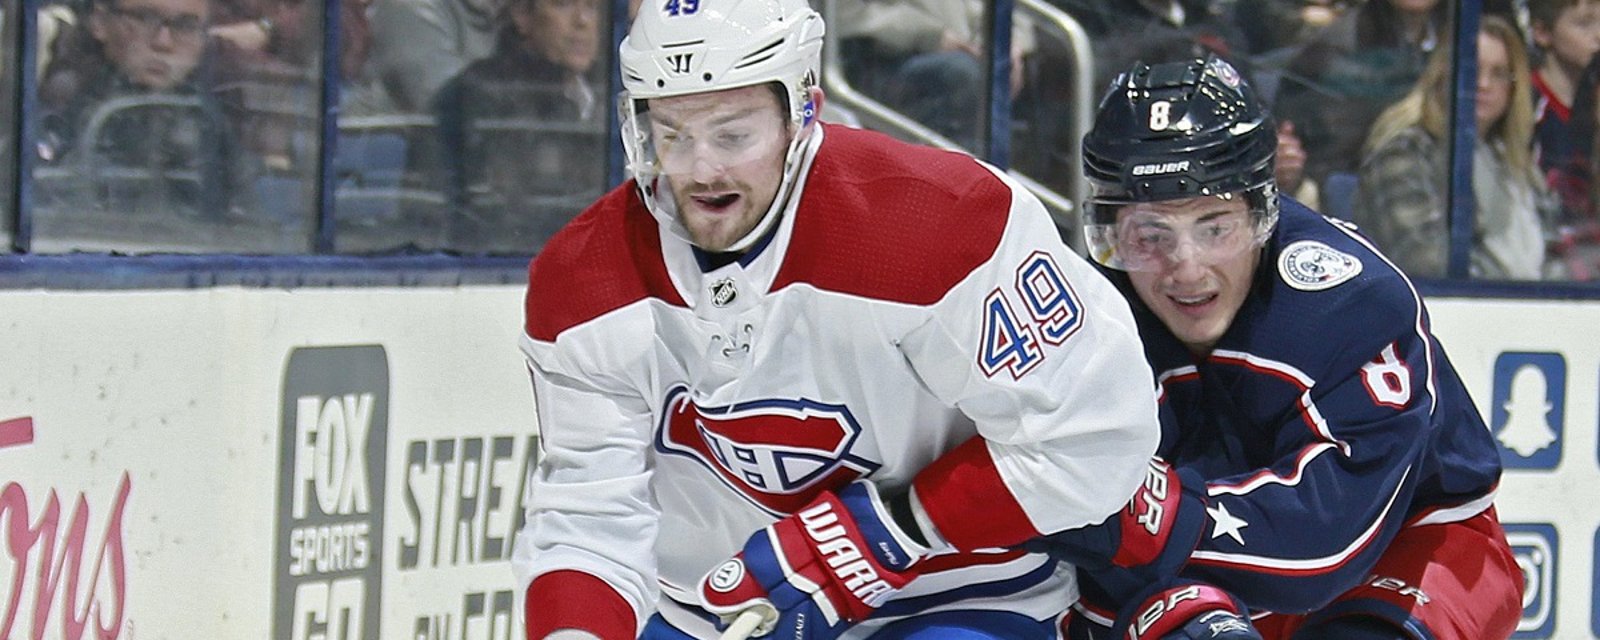 Report: Jets sign former Habs' forward to a new NHL contract.